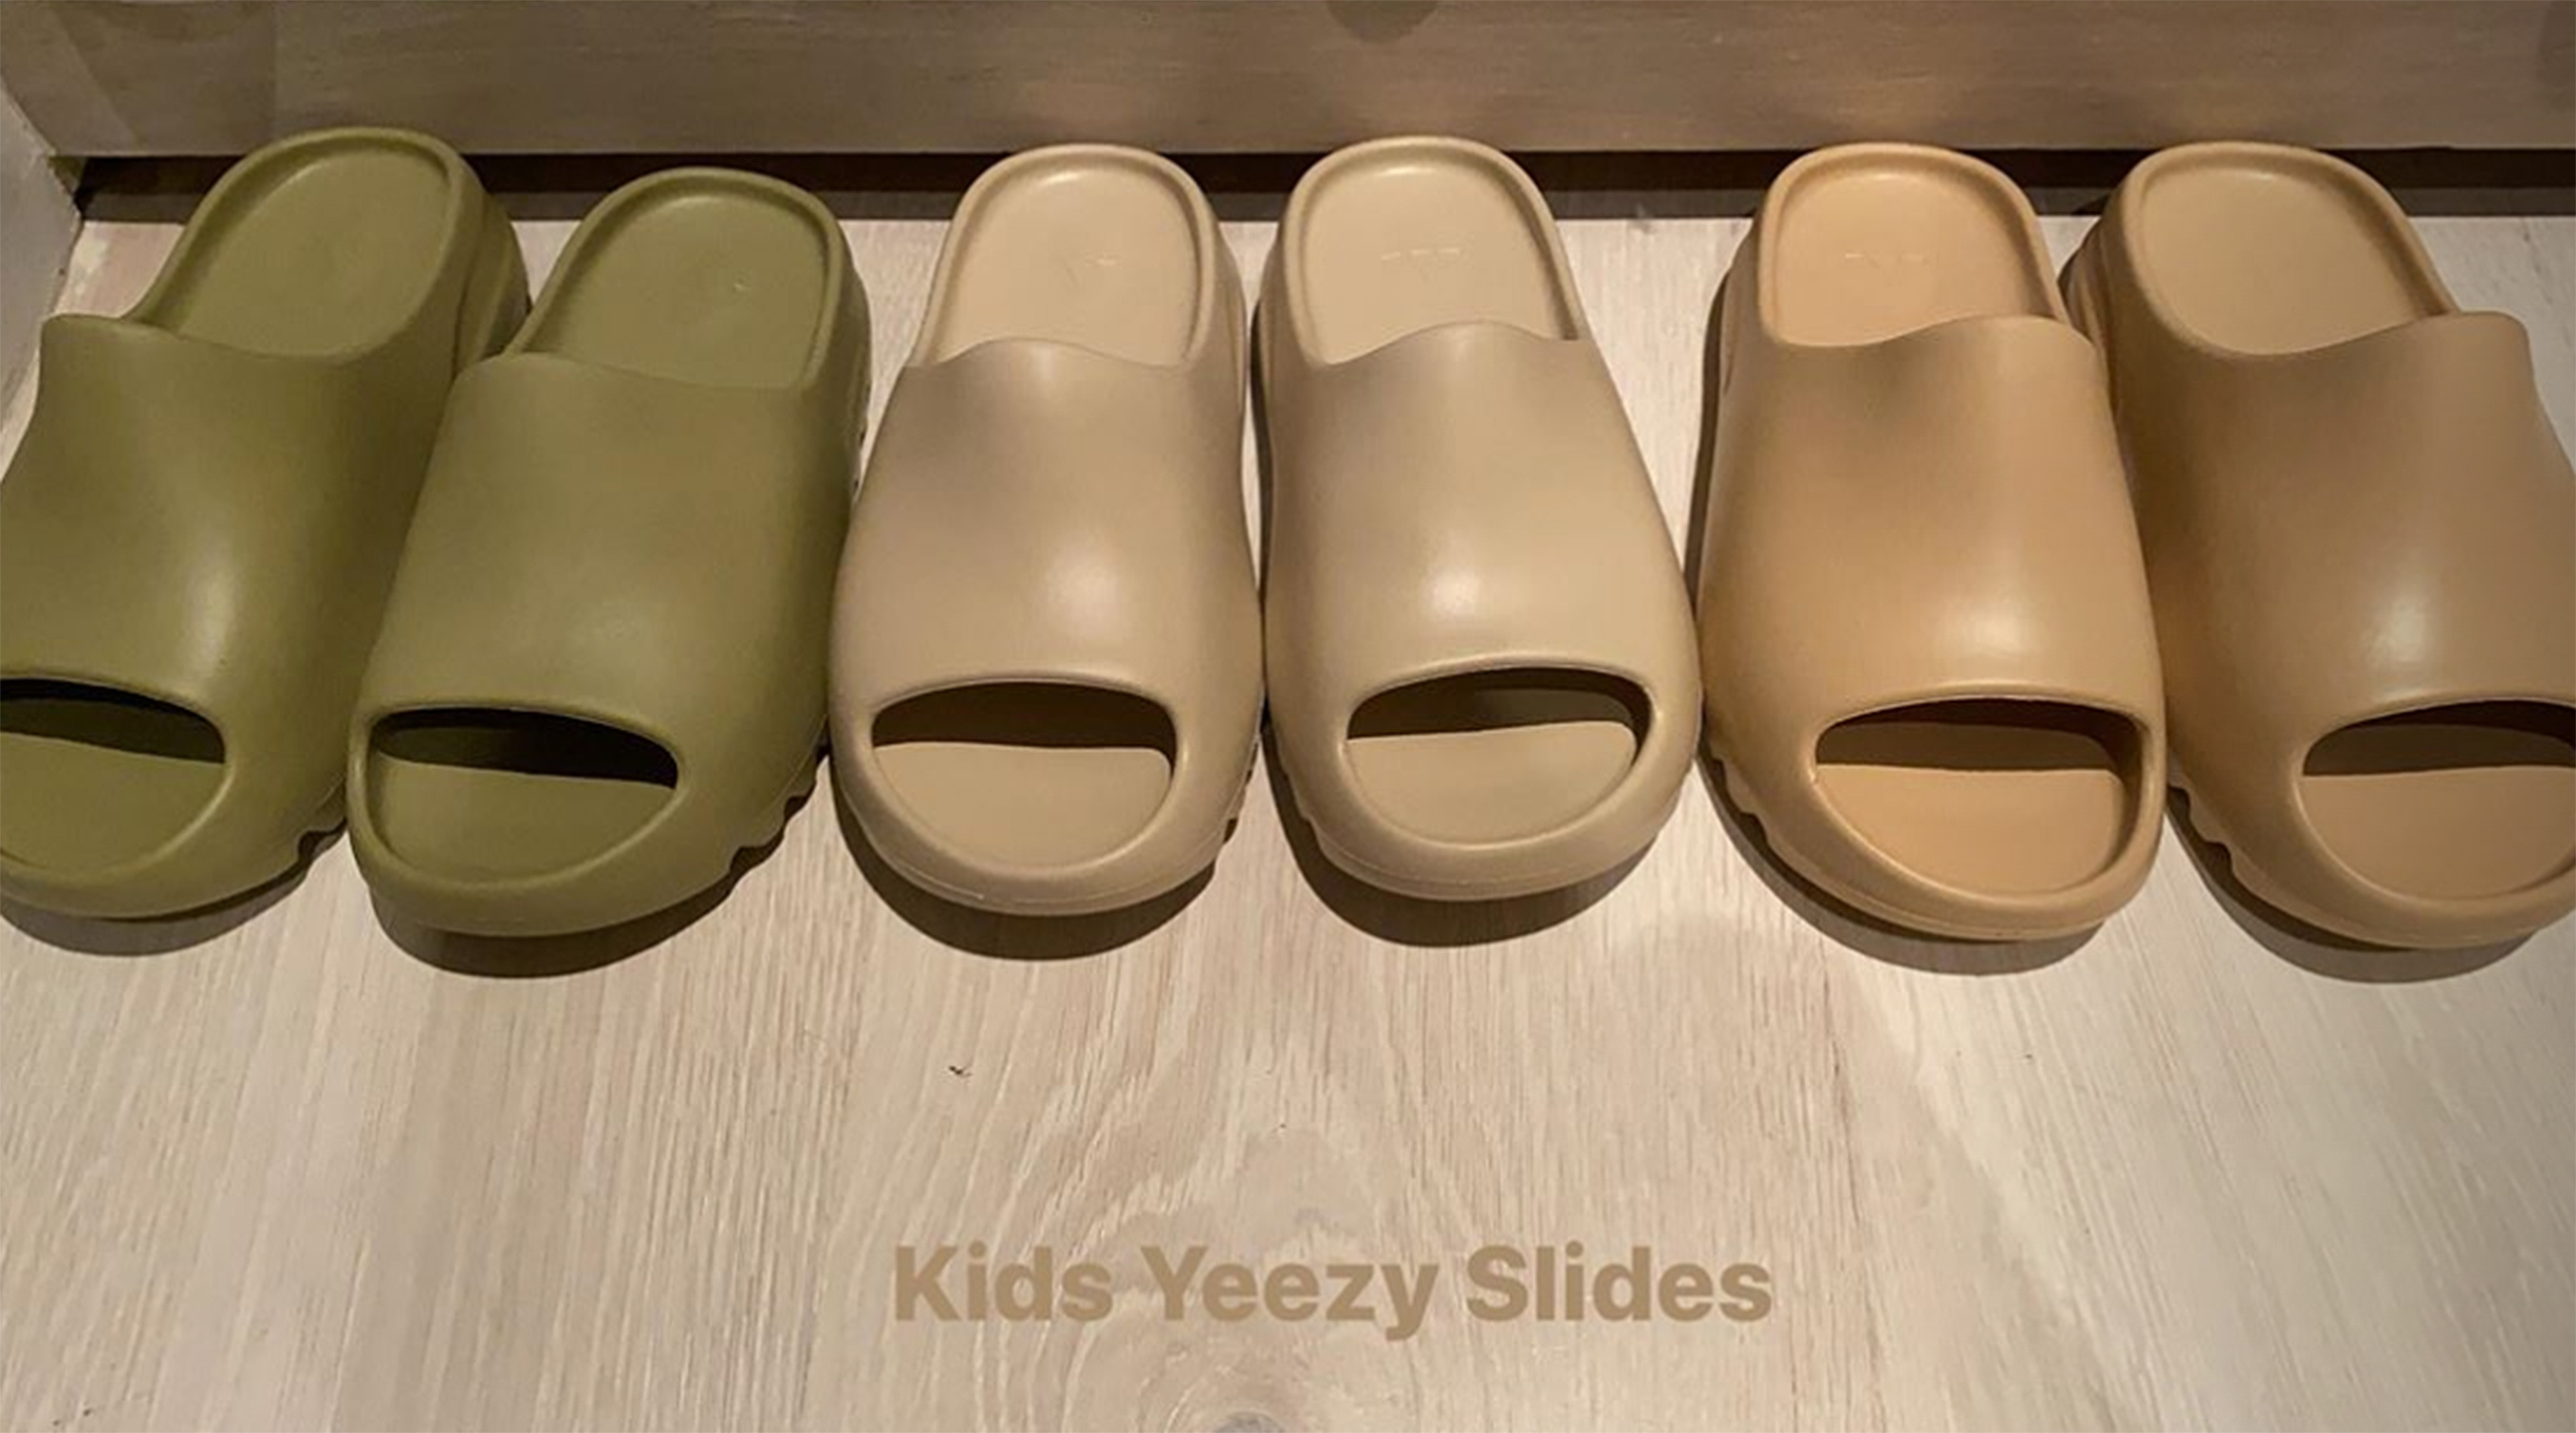 retail for yeezy slides